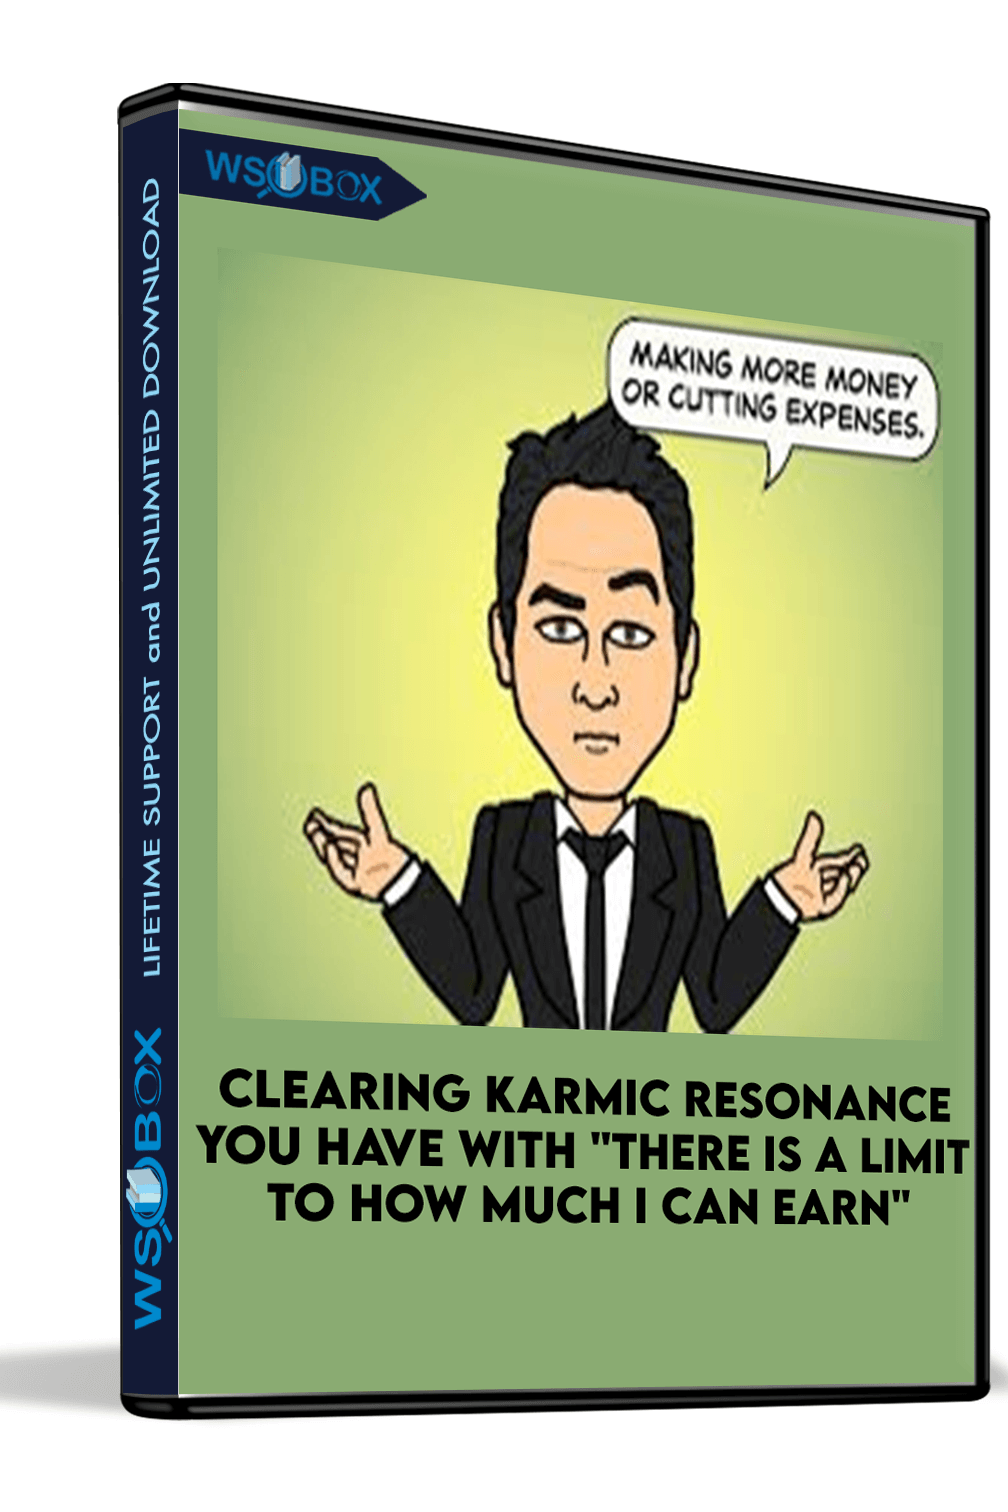 clearing-karmic-resonance-you-have-with-there-is-a-limit-to-how-much-i-can-earn